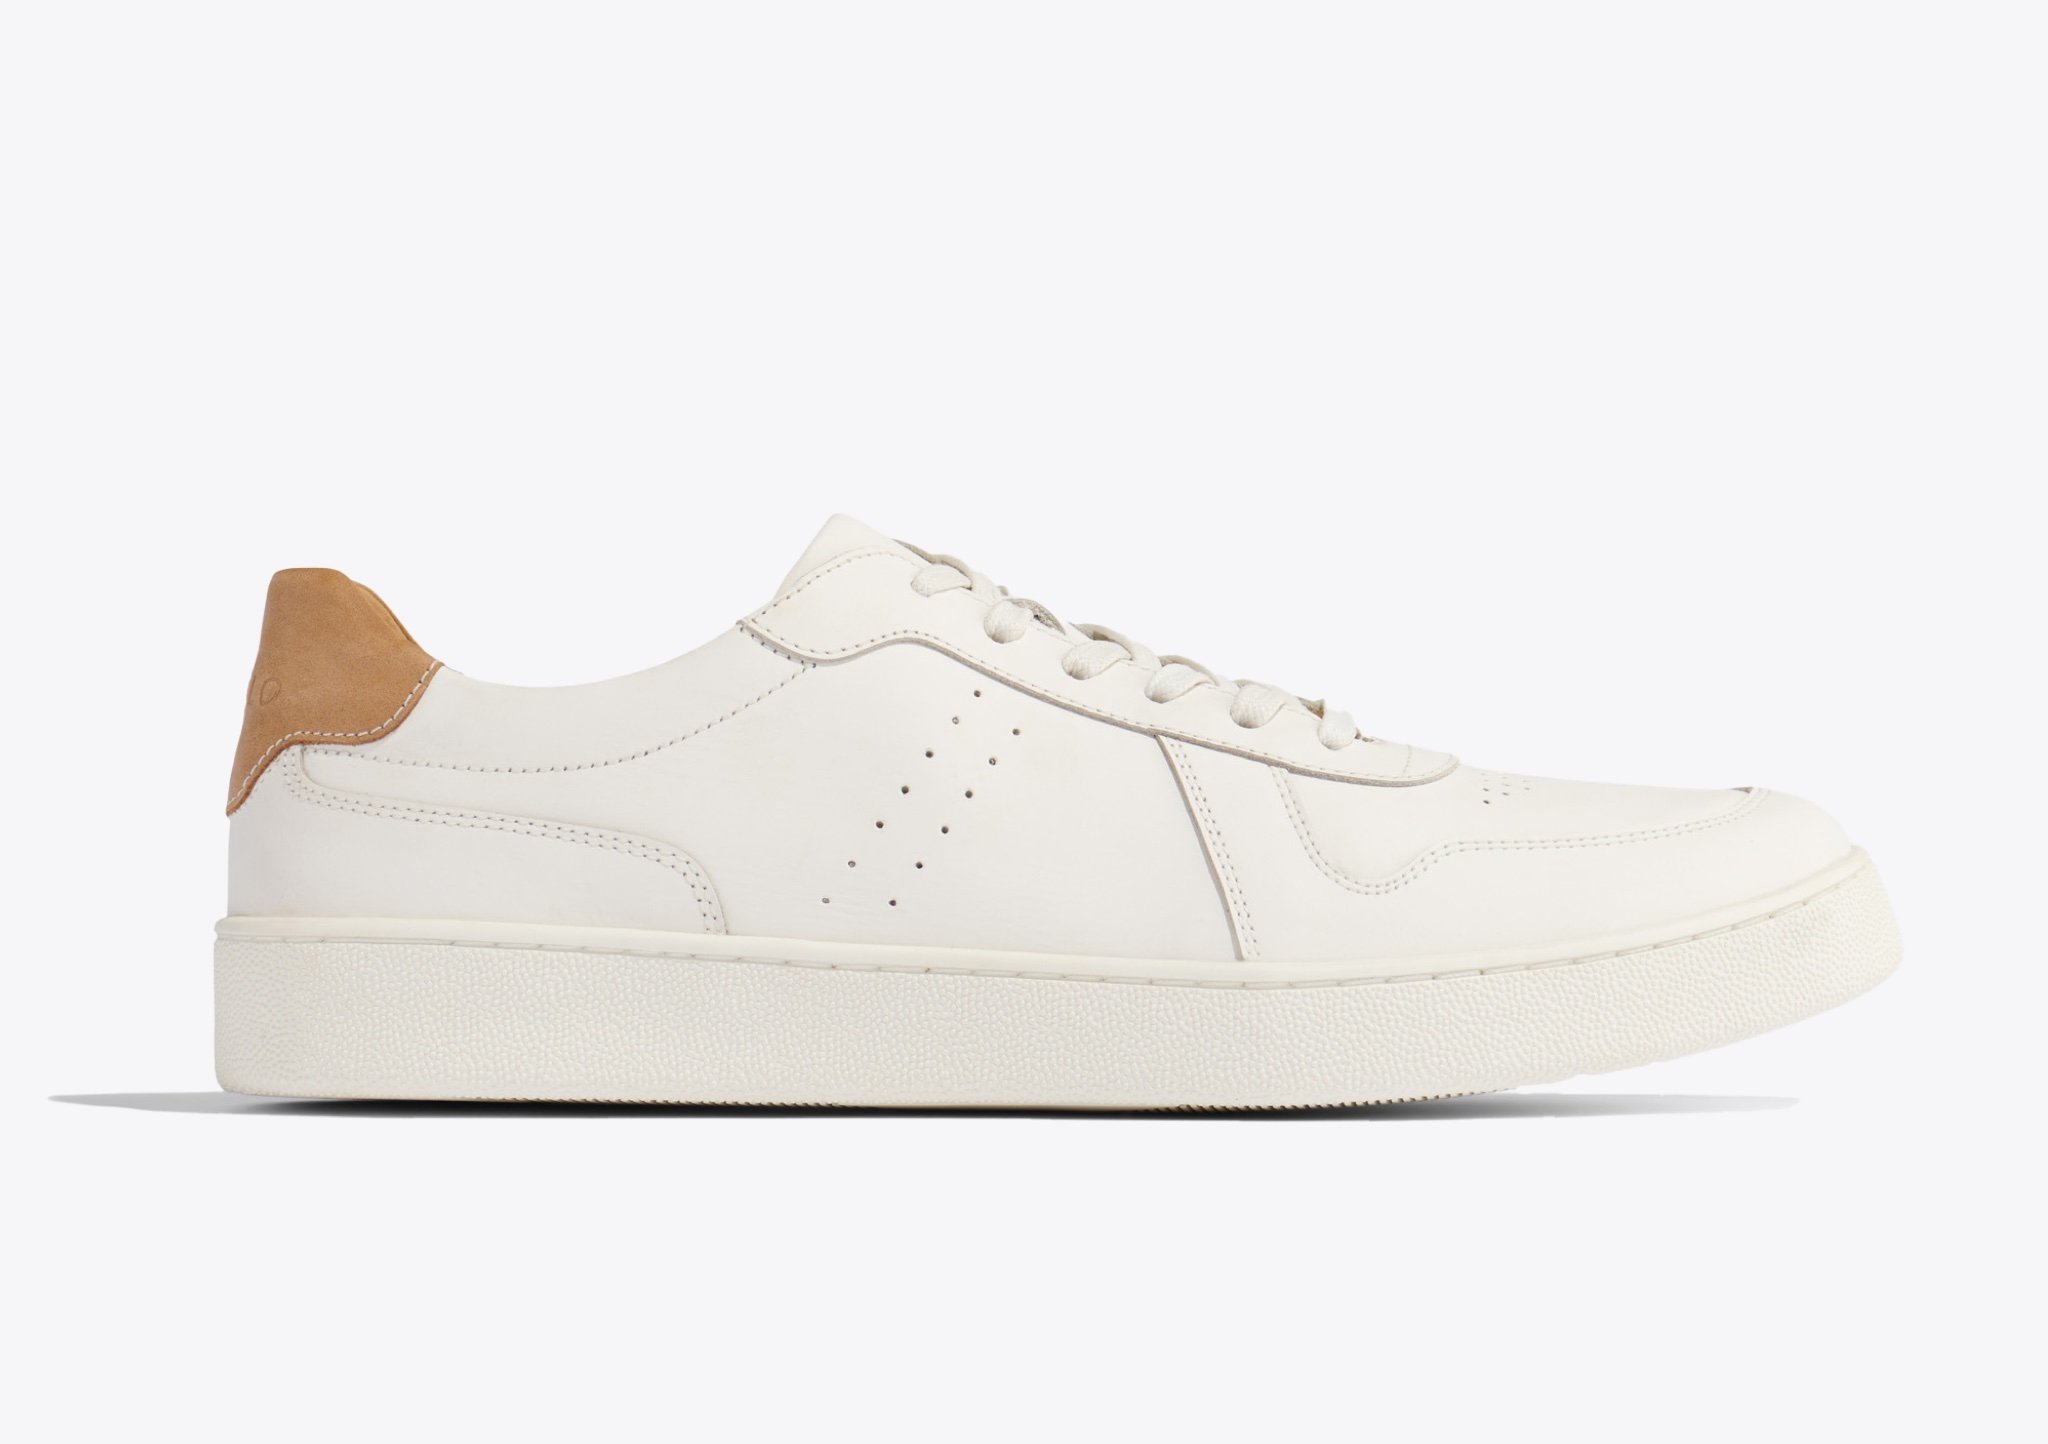 Nisolo Beto Go-To Court Sneaker White - Every Nisolo product is built on the foundation of comfort, function, and design. 